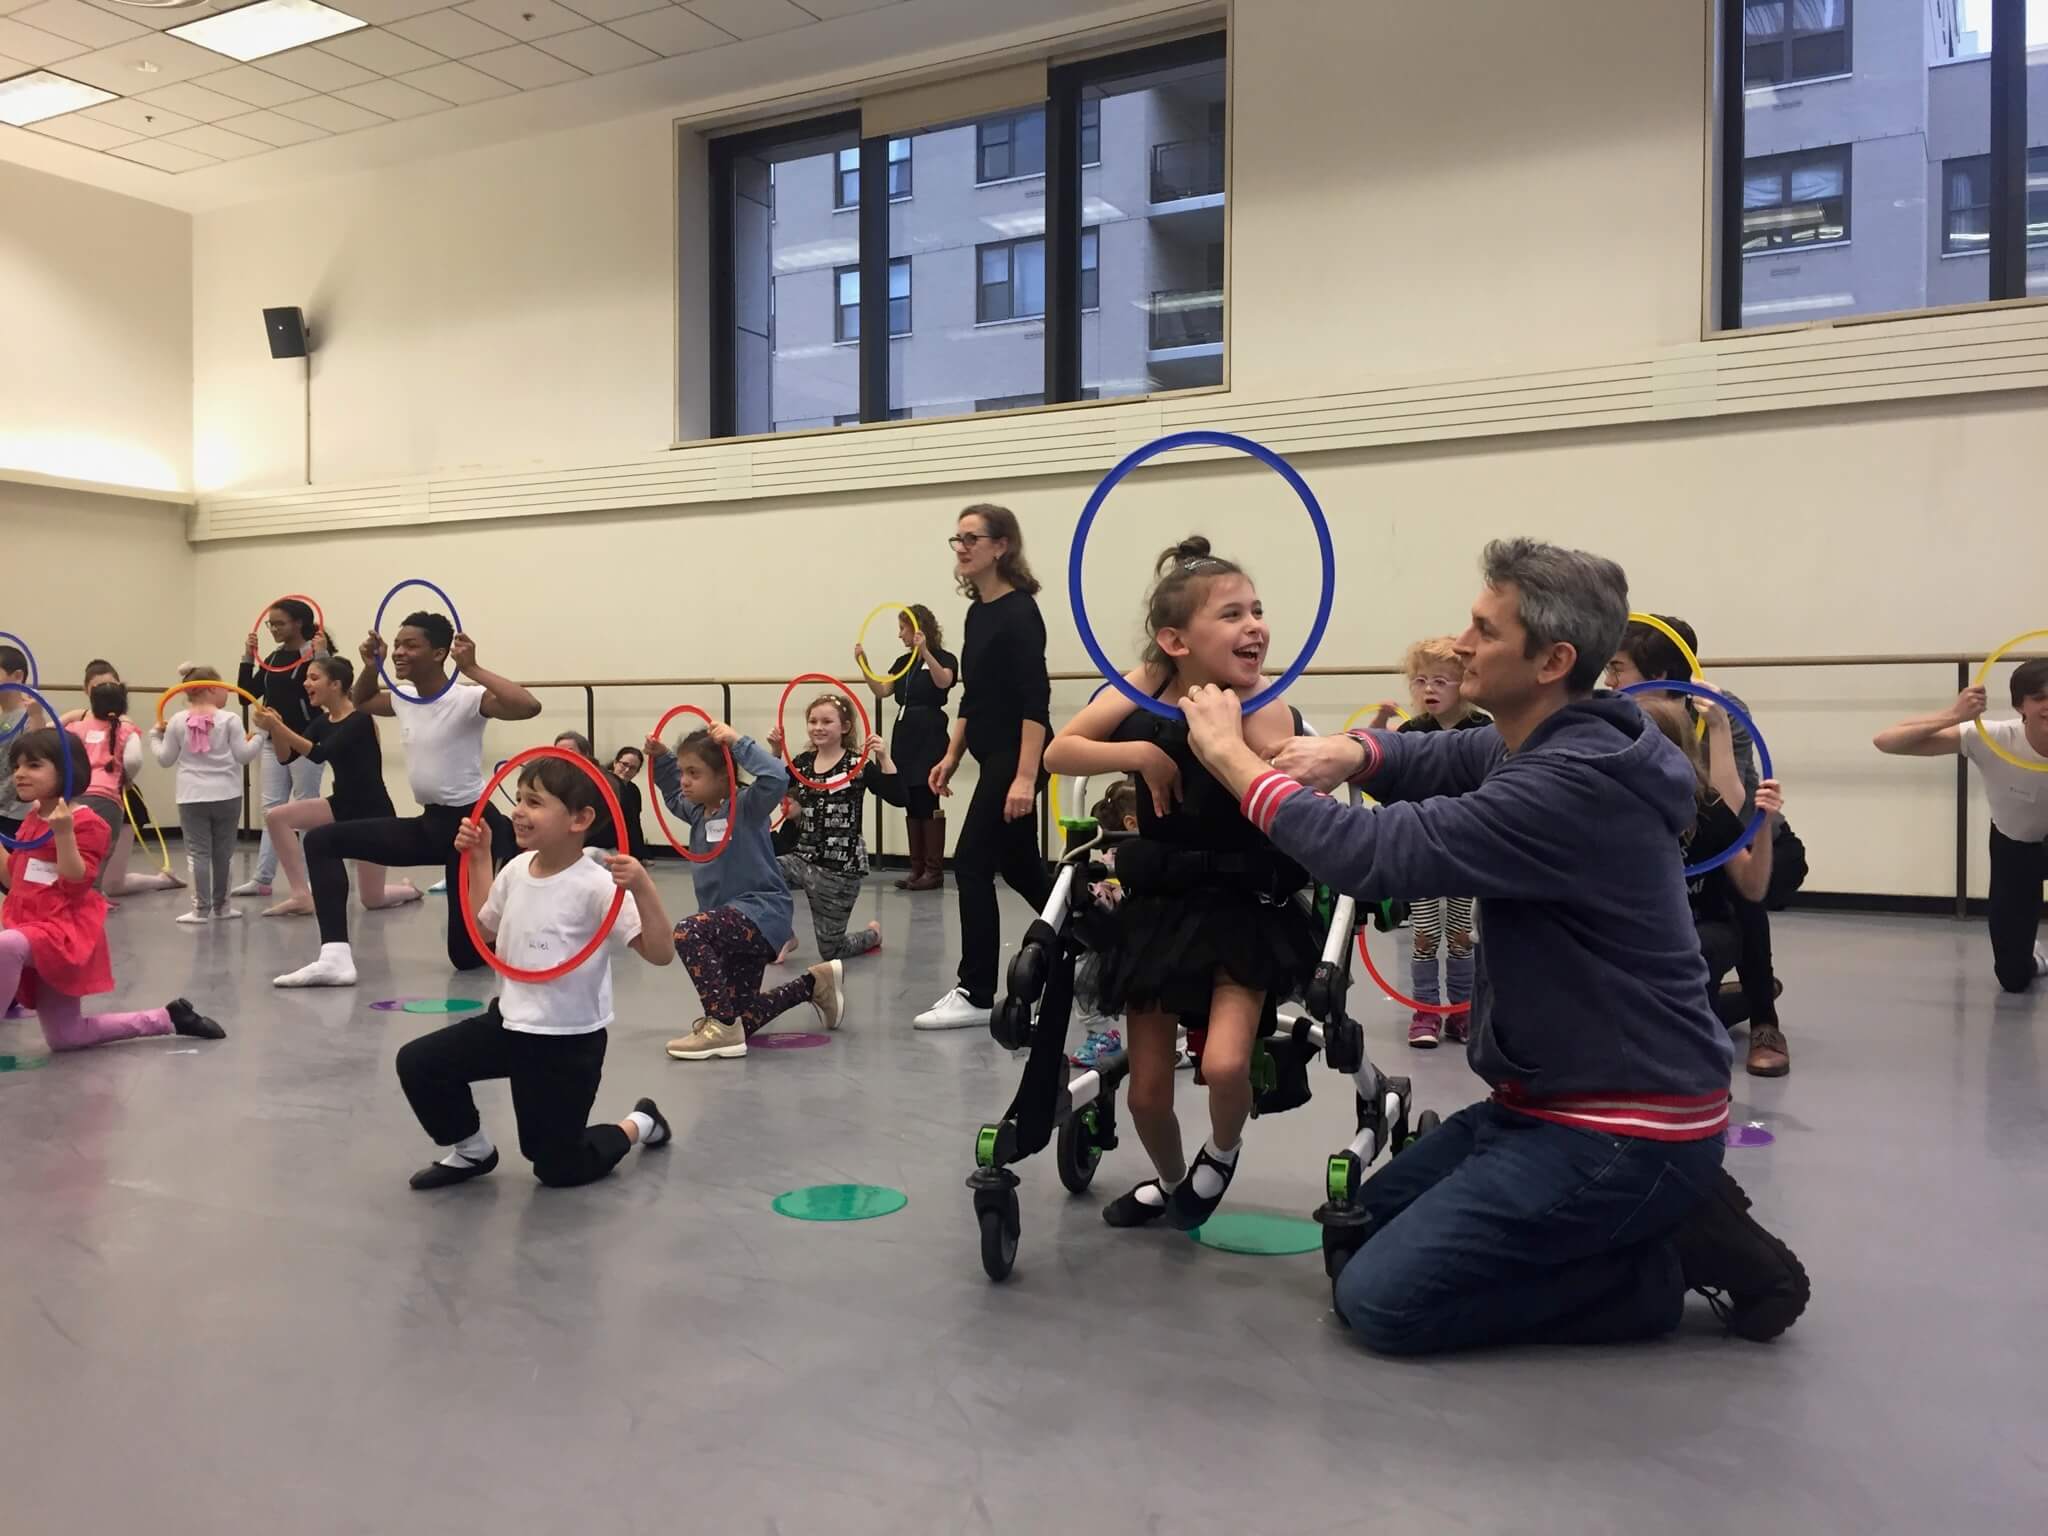 Photo of a youth dance class, with the focus on one young girl who has a physical disability, smiling as an adult man assists her in participation by holding a ring to her face.